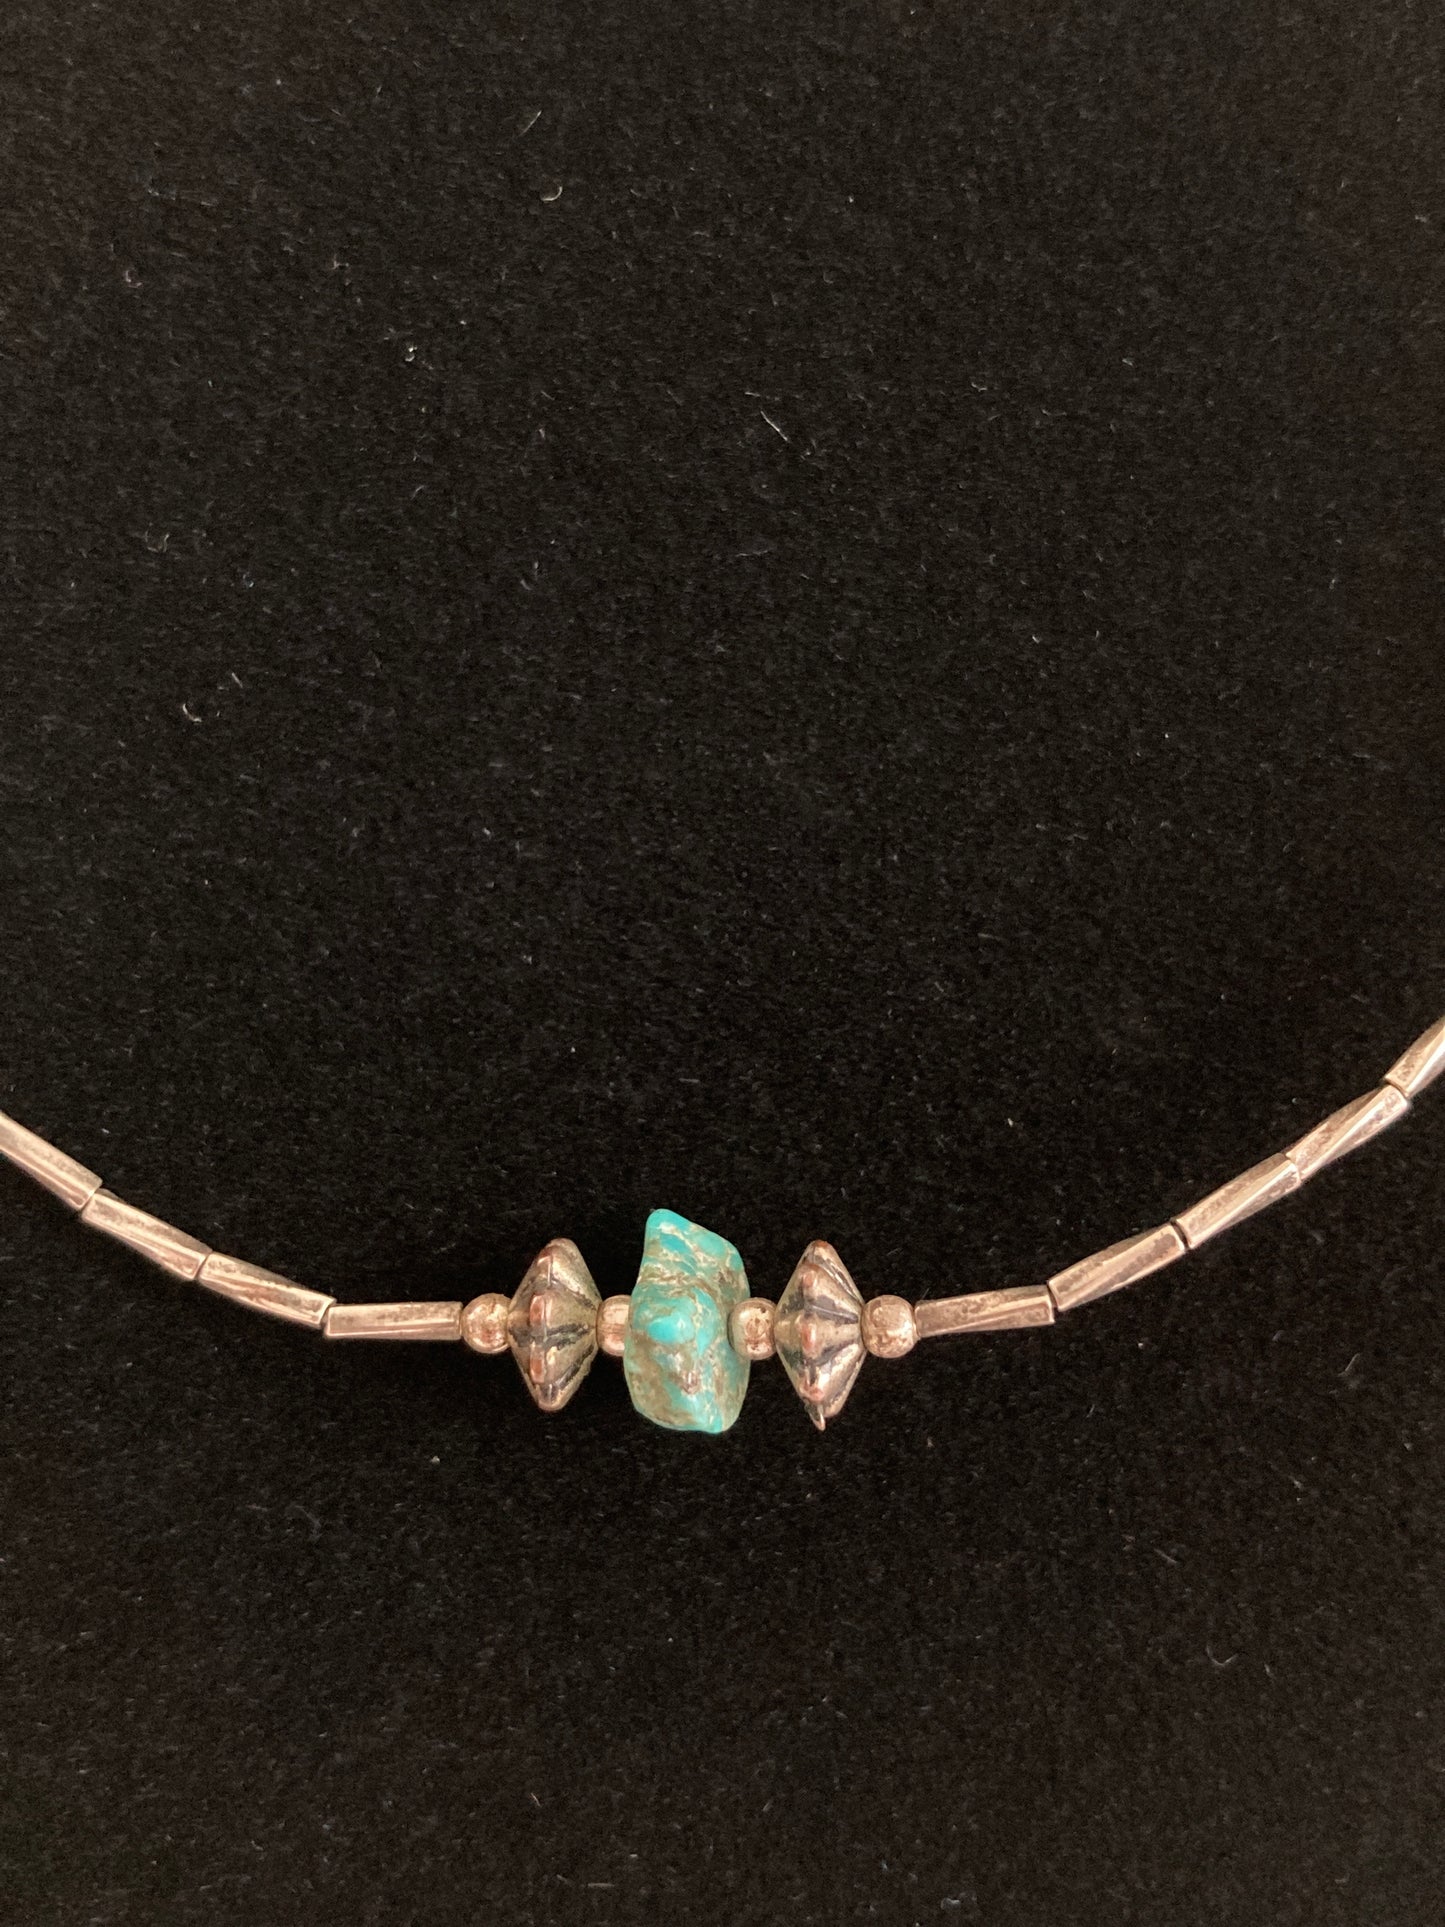 1970s Twisted Liquid Silver and Turquoise Necklace